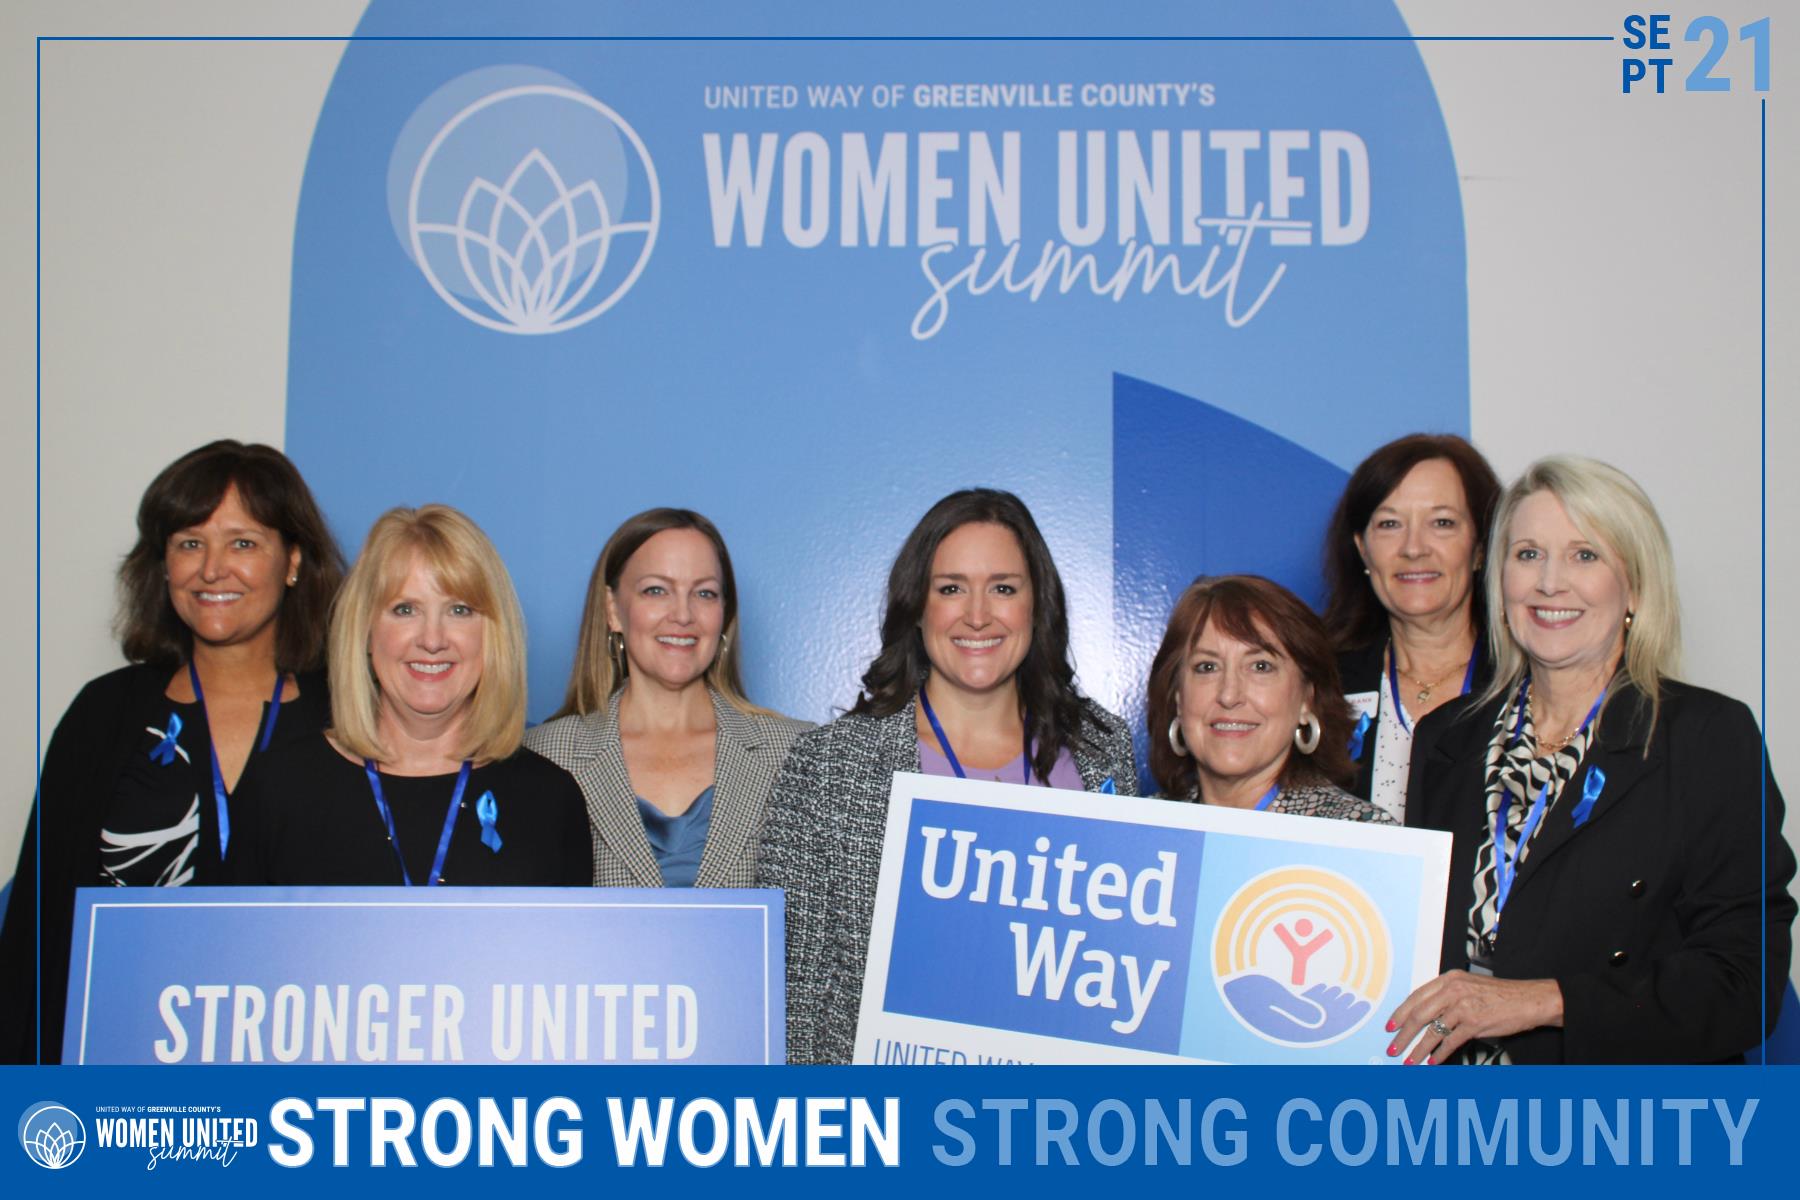 Strong Women = Strong Community: Takeaways from our inaugural Women United Summit